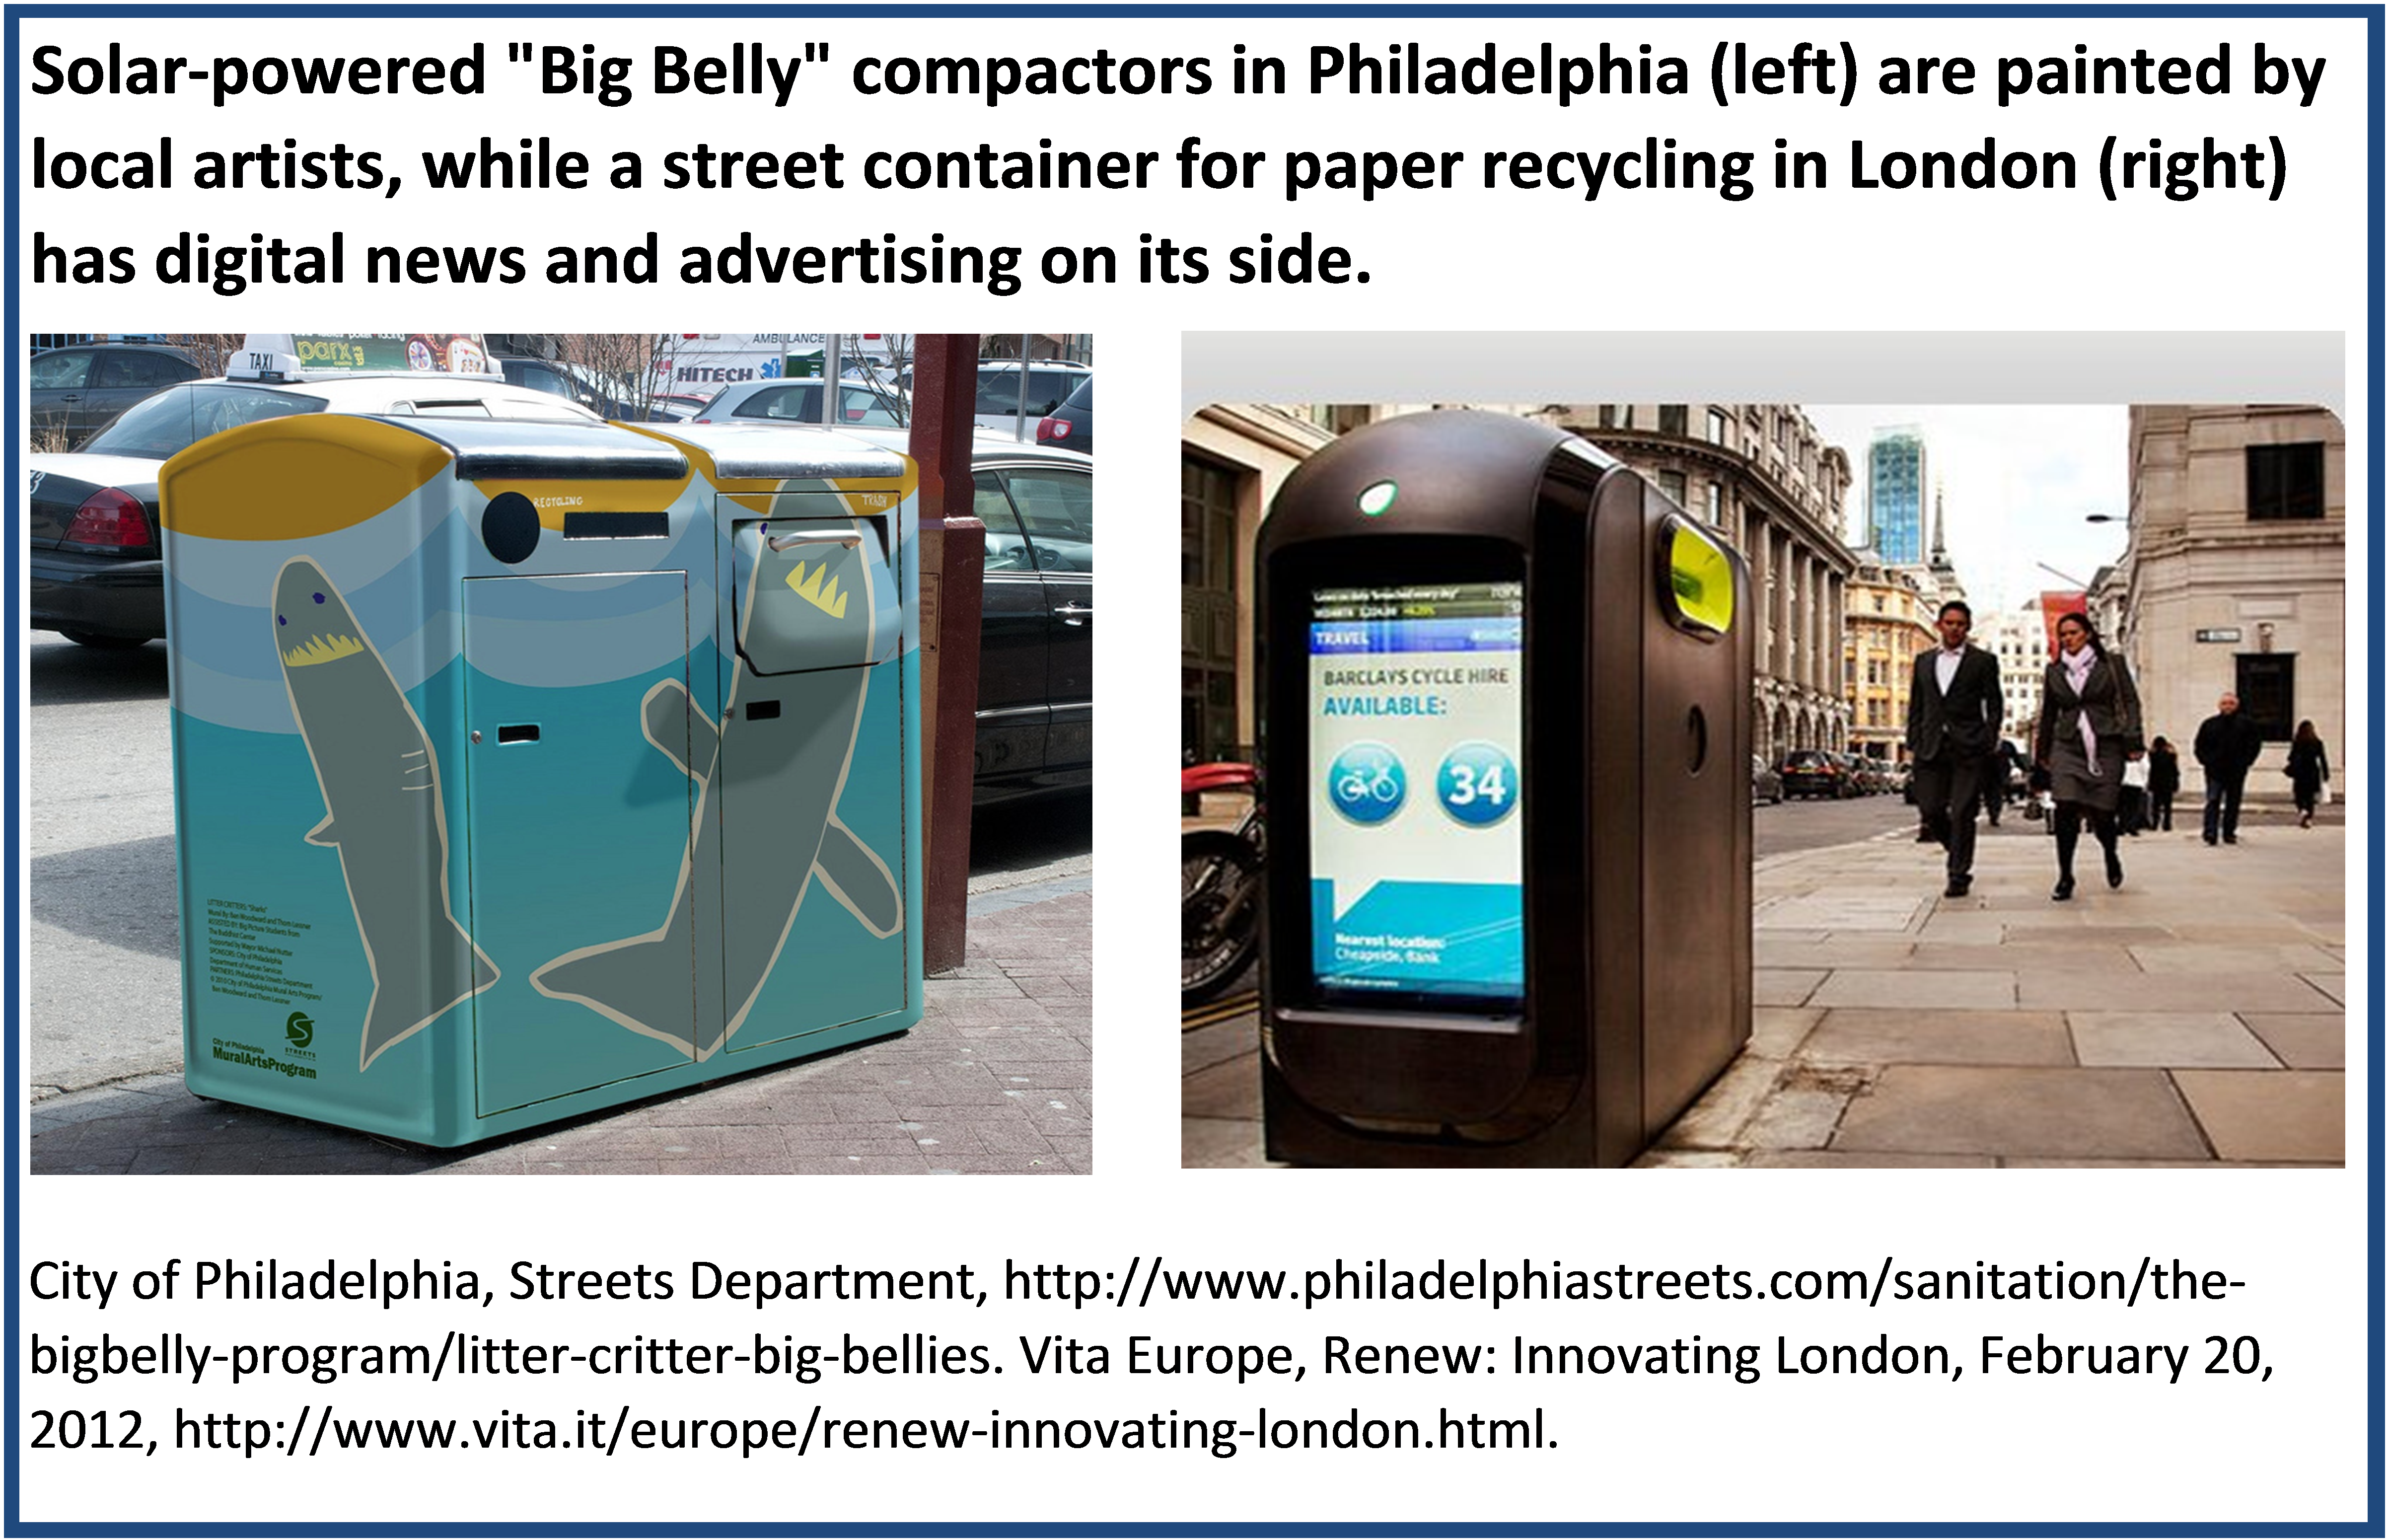 Solar-powered "Big Belly" compactors in Philadelphia and a street container for paper recycling in London.